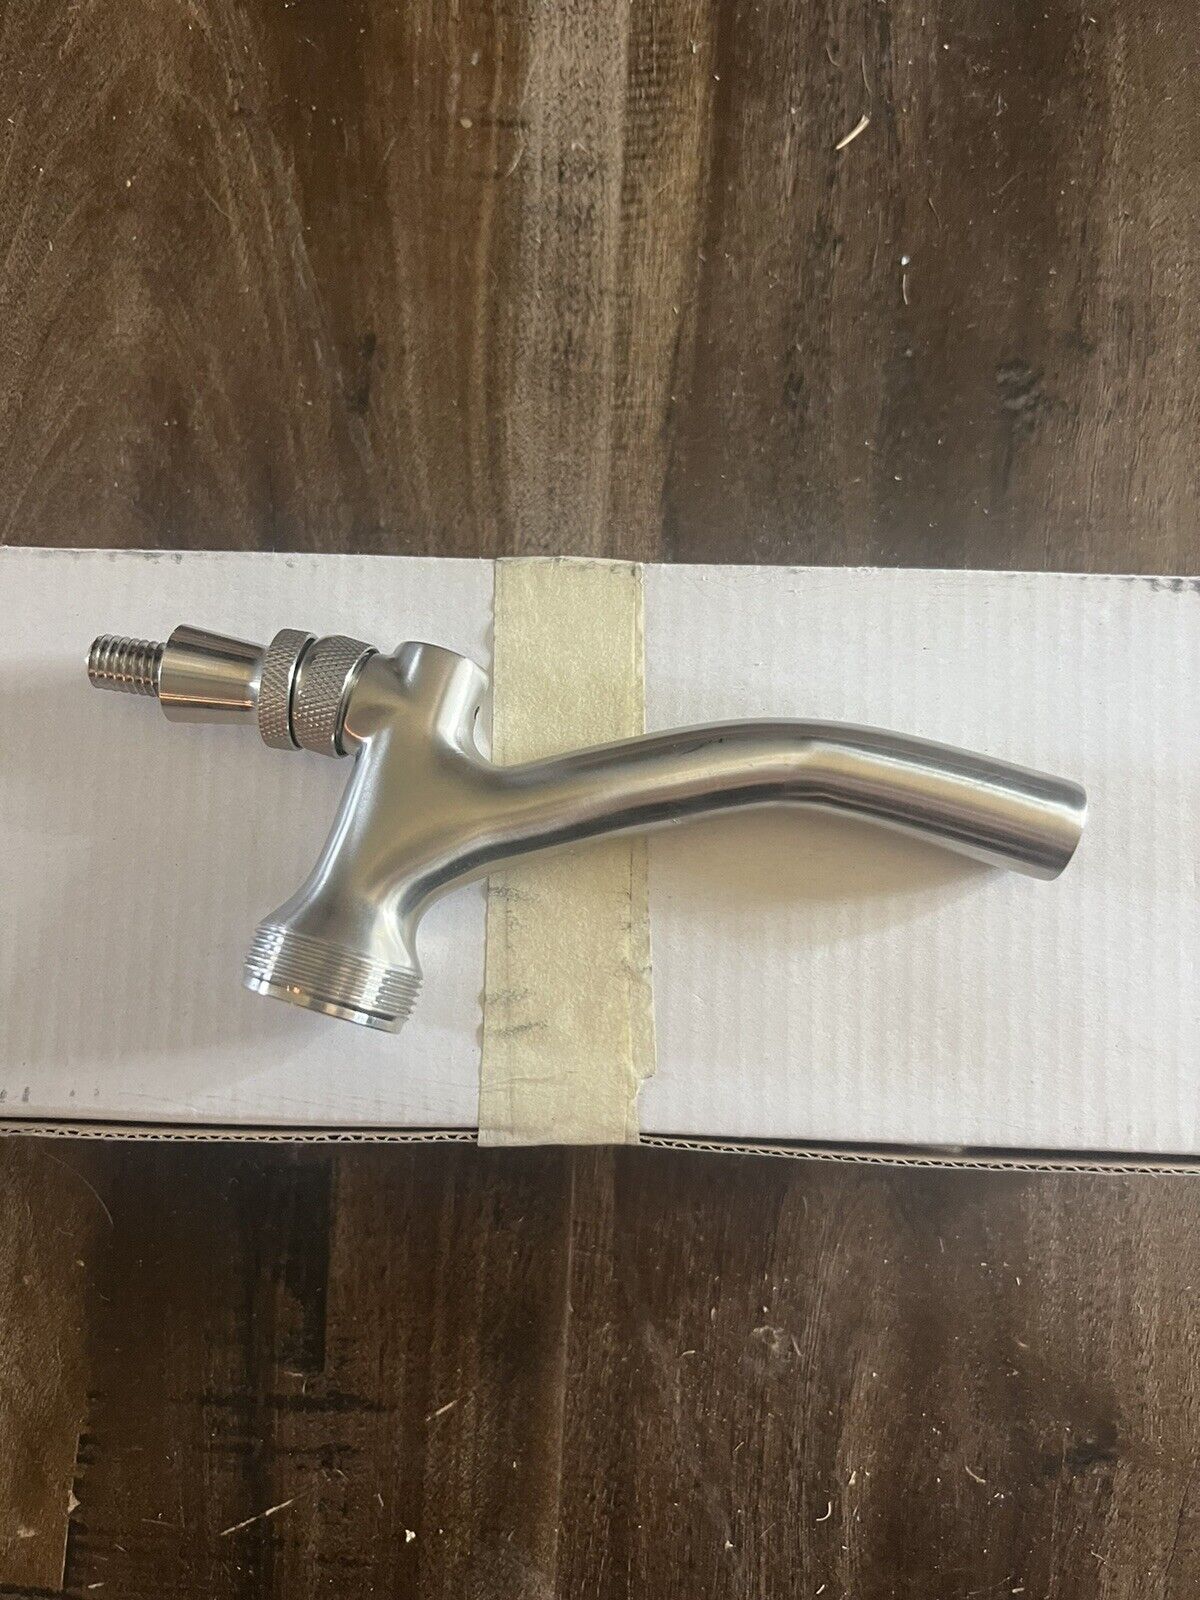 Turbo Tap For Draft Beer. As Seen On Bar Rescue. Brand New Never Used